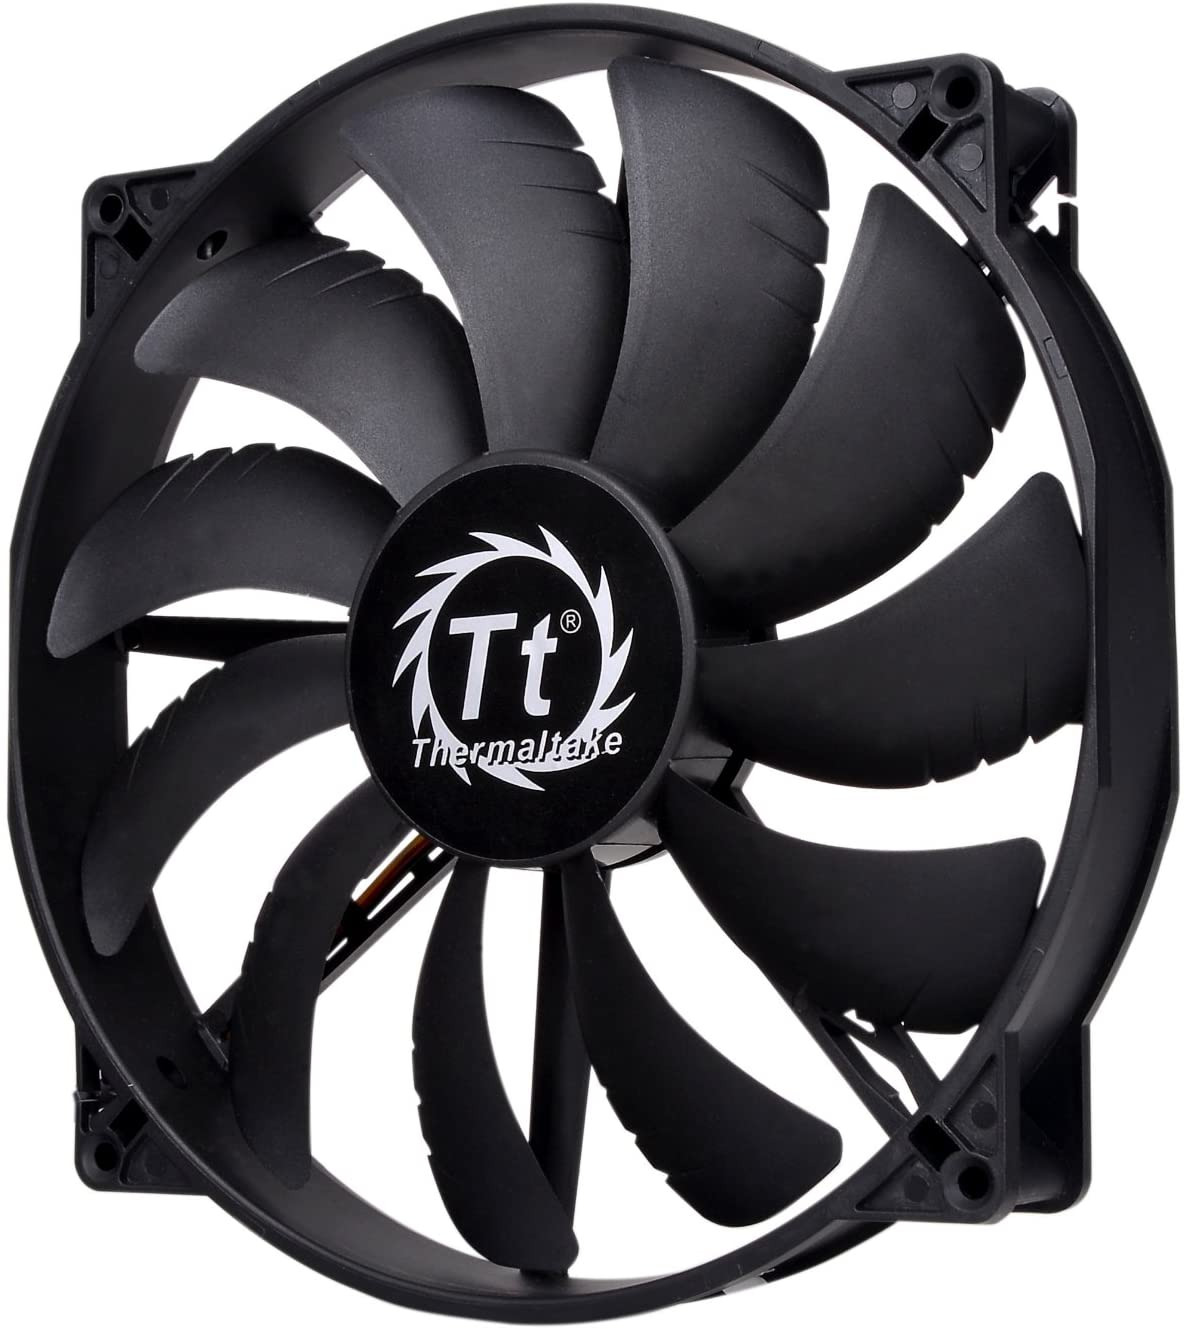 200Mm Pure 20 Series Black 200X30Mm Thick Quiet High Airflow Case Fan with Anti-